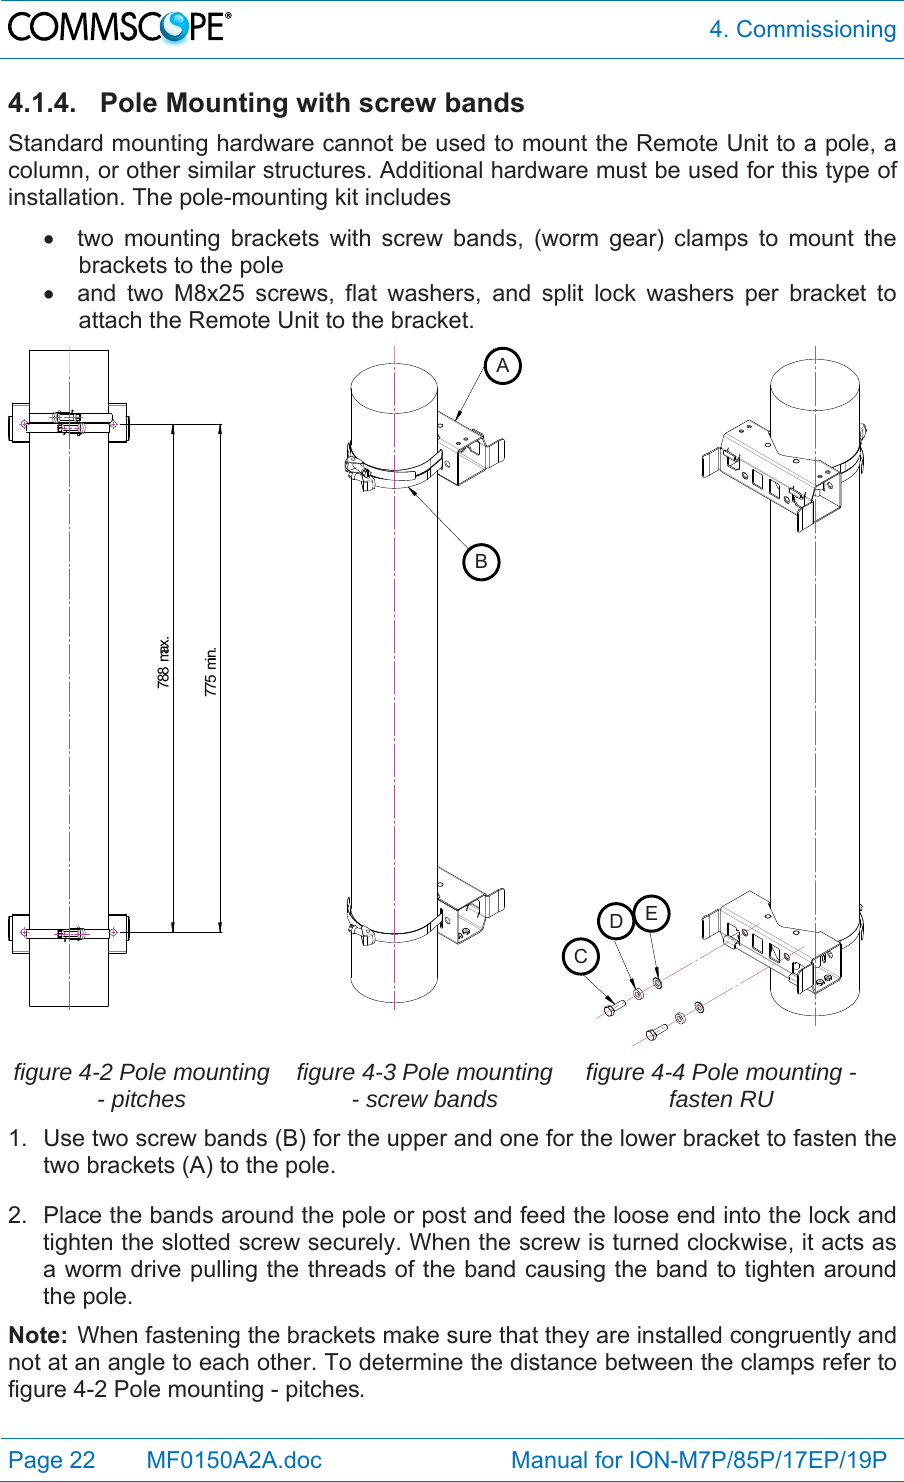  4. Commissioning Page 22   MF0150A2A.doc                             Manual for ION-M7P/85P/17EP/19P  4.1.4. Pole Mounting with screw bands Standard mounting hardware cannot be used to mount the Remote Unit to a pole, a column, or other similar structures. Additional hardware must be used for this type of installation. The pole-mounting kit includes   two mounting brackets with screw bands, (worm gear) clamps to mount the brackets to the pole   and two M8x25 screws, flat washers, and split lock washers per bracket to attach the Remote Unit to the bracket. 775 min.788 max.   figure 4-2 Pole mounting - pitches  figure 4-3 Pole mounting - screw bands  figure 4-4 Pole mounting - fasten RU 1.  Use two screw bands (B) for the upper and one for the lower bracket to fasten the two brackets (A) to the pole. 2.  Place the bands around the pole or post and feed the loose end into the lock and tighten the slotted screw securely. When the screw is turned clockwise, it acts as a worm drive pulling the threads of the band causing the band to tighten around the pole. Note:  When fastening the brackets make sure that they are installed congruently and not at an angle to each other. To determine the distance between the clamps refer to figure 4-2 Pole mounting - pitches. ABCDE